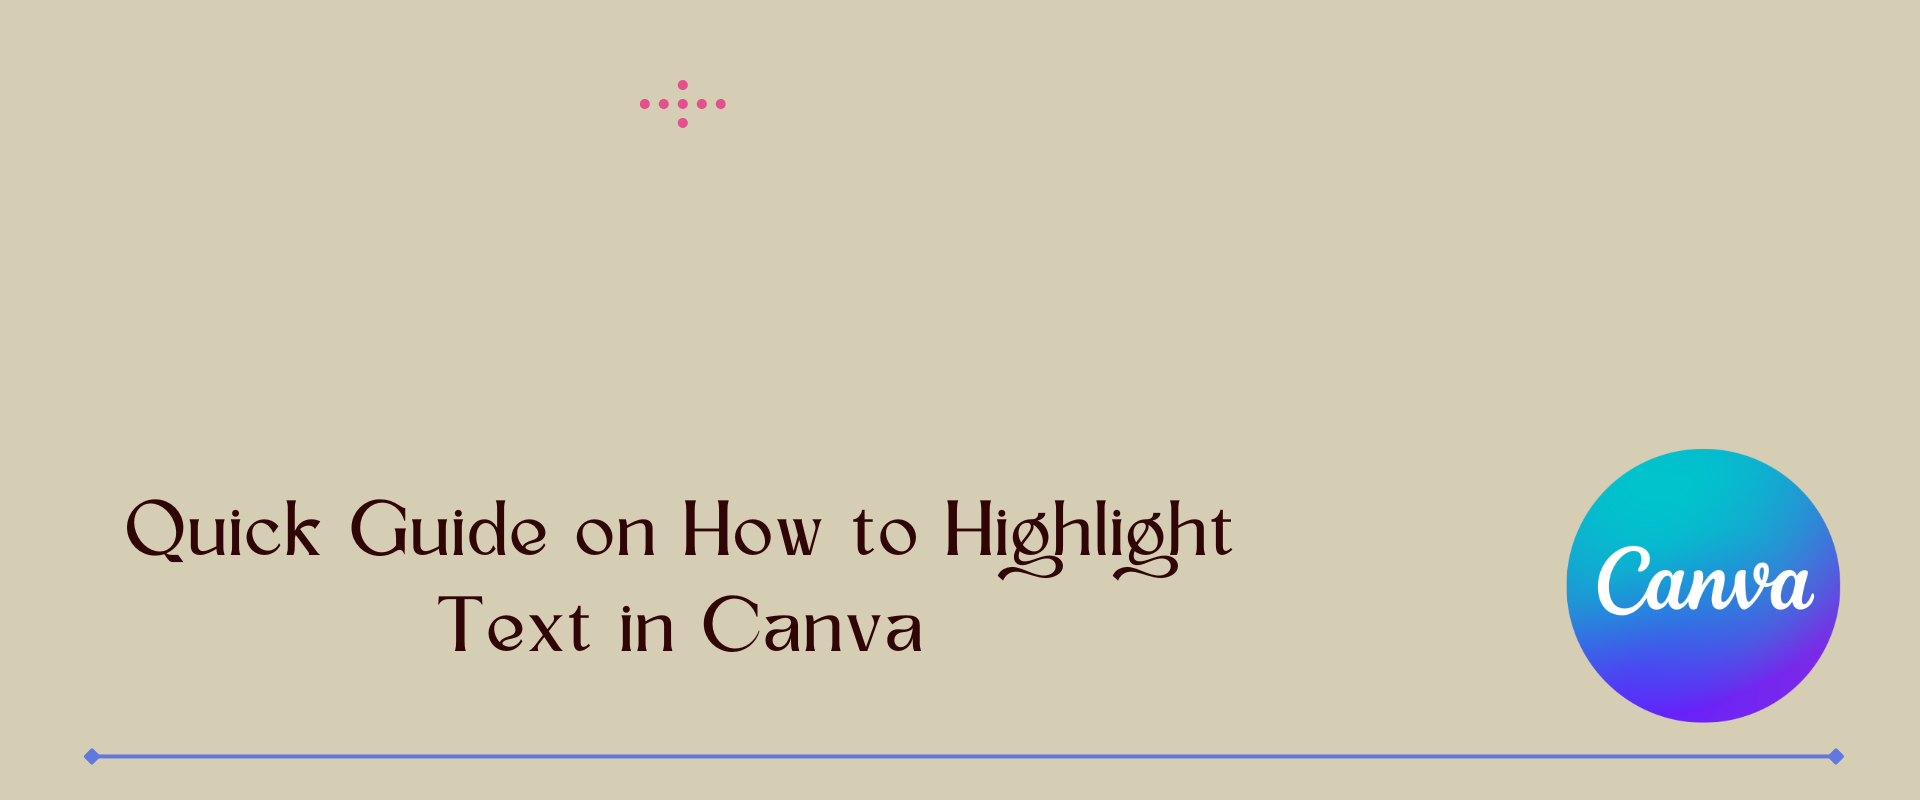 Quick Guide on How to Highlight Text in Canva